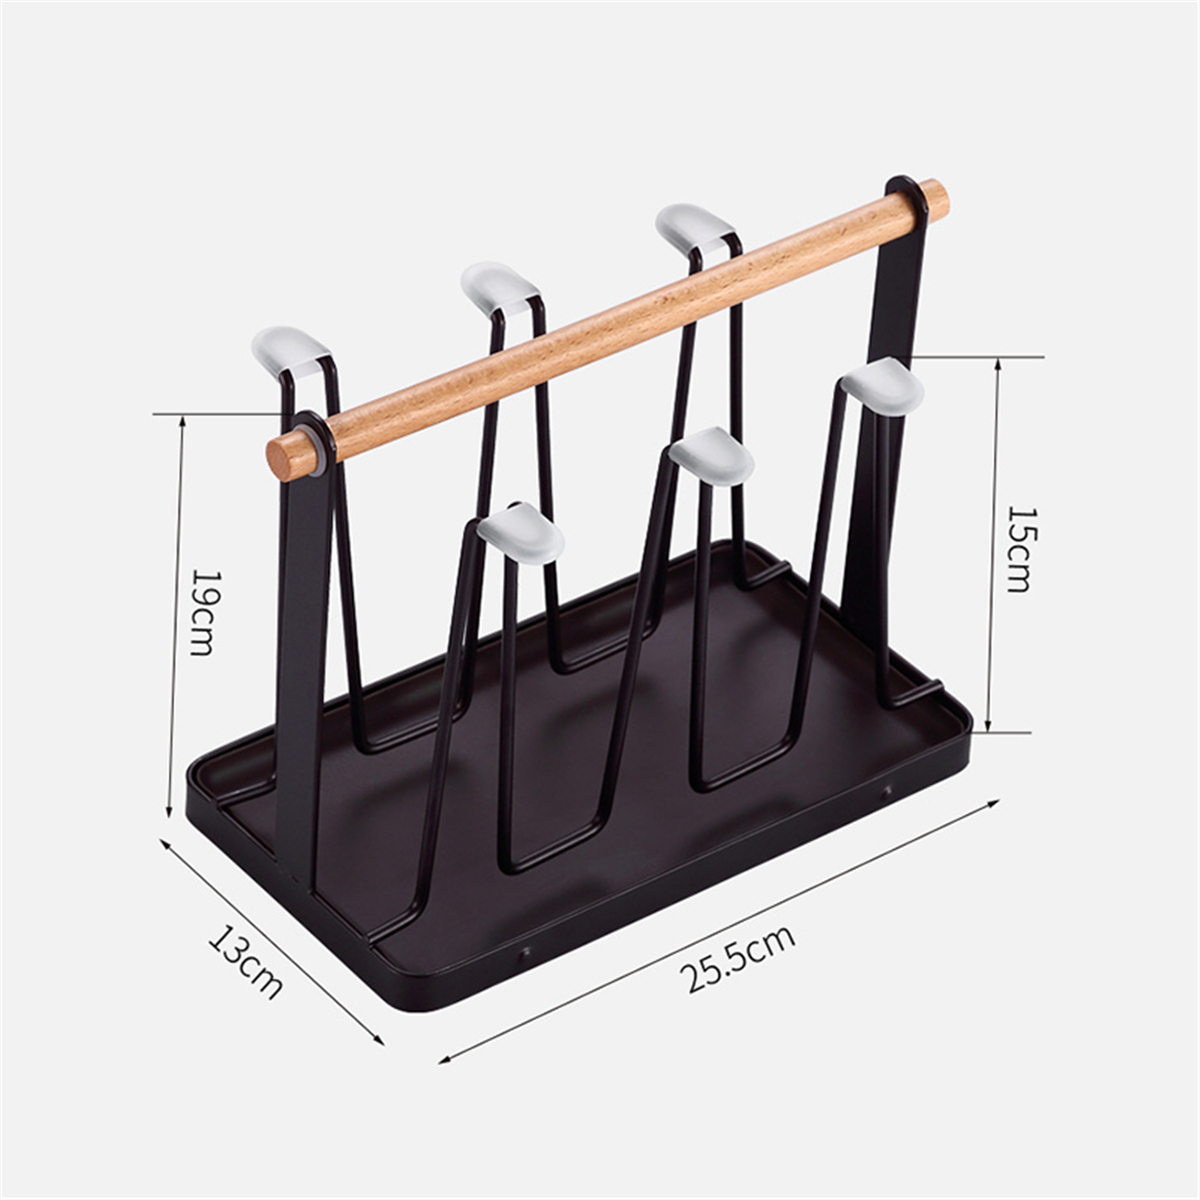 Wrought-Iron-Upside-Down-Drain-Japanese-Style-Cup-Holder-Water-Cup-Mug-Storage-Rack-Drain-Rack-1722859-7